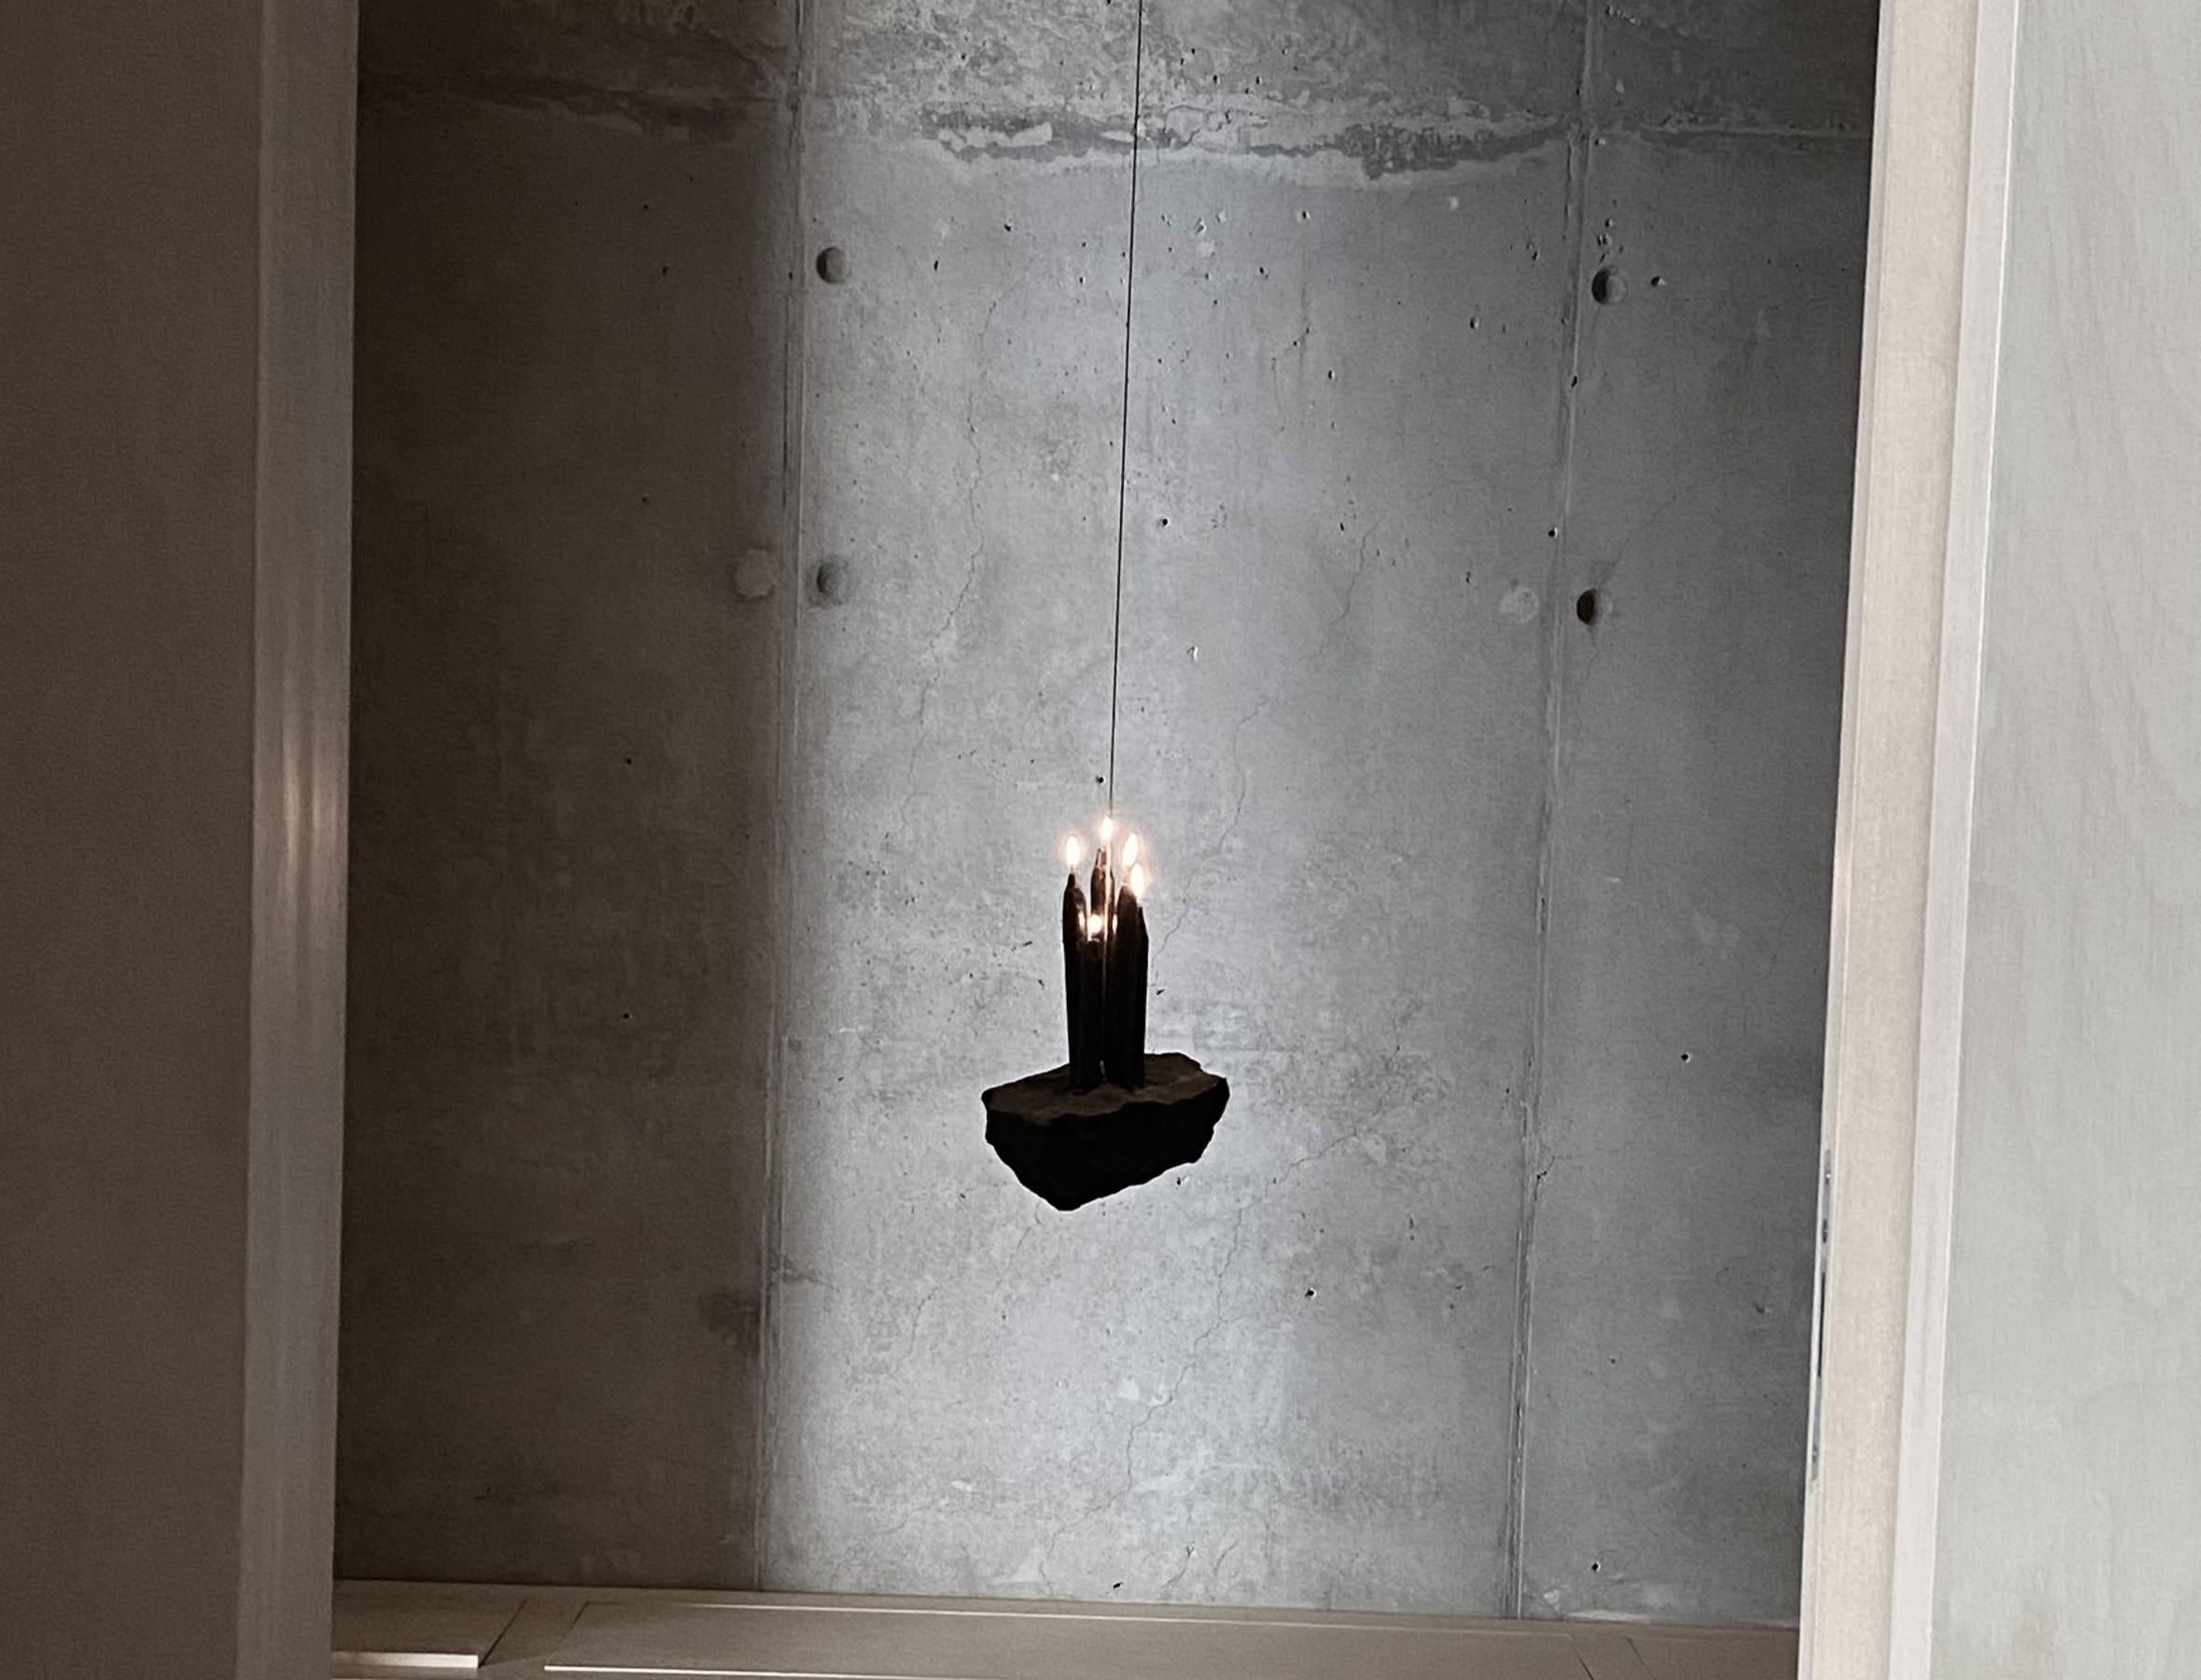 Existencia Basalt Stone Candleholder by Andres Monnier
Dimensions: D 40 x W 50 x H 60 cm.
Materials: Basalt Stone.

Andrés Monnier, born in Guadalajara but based in Ensenada, Mexico. His
purpose is to create sculptural pieces to spread materialized